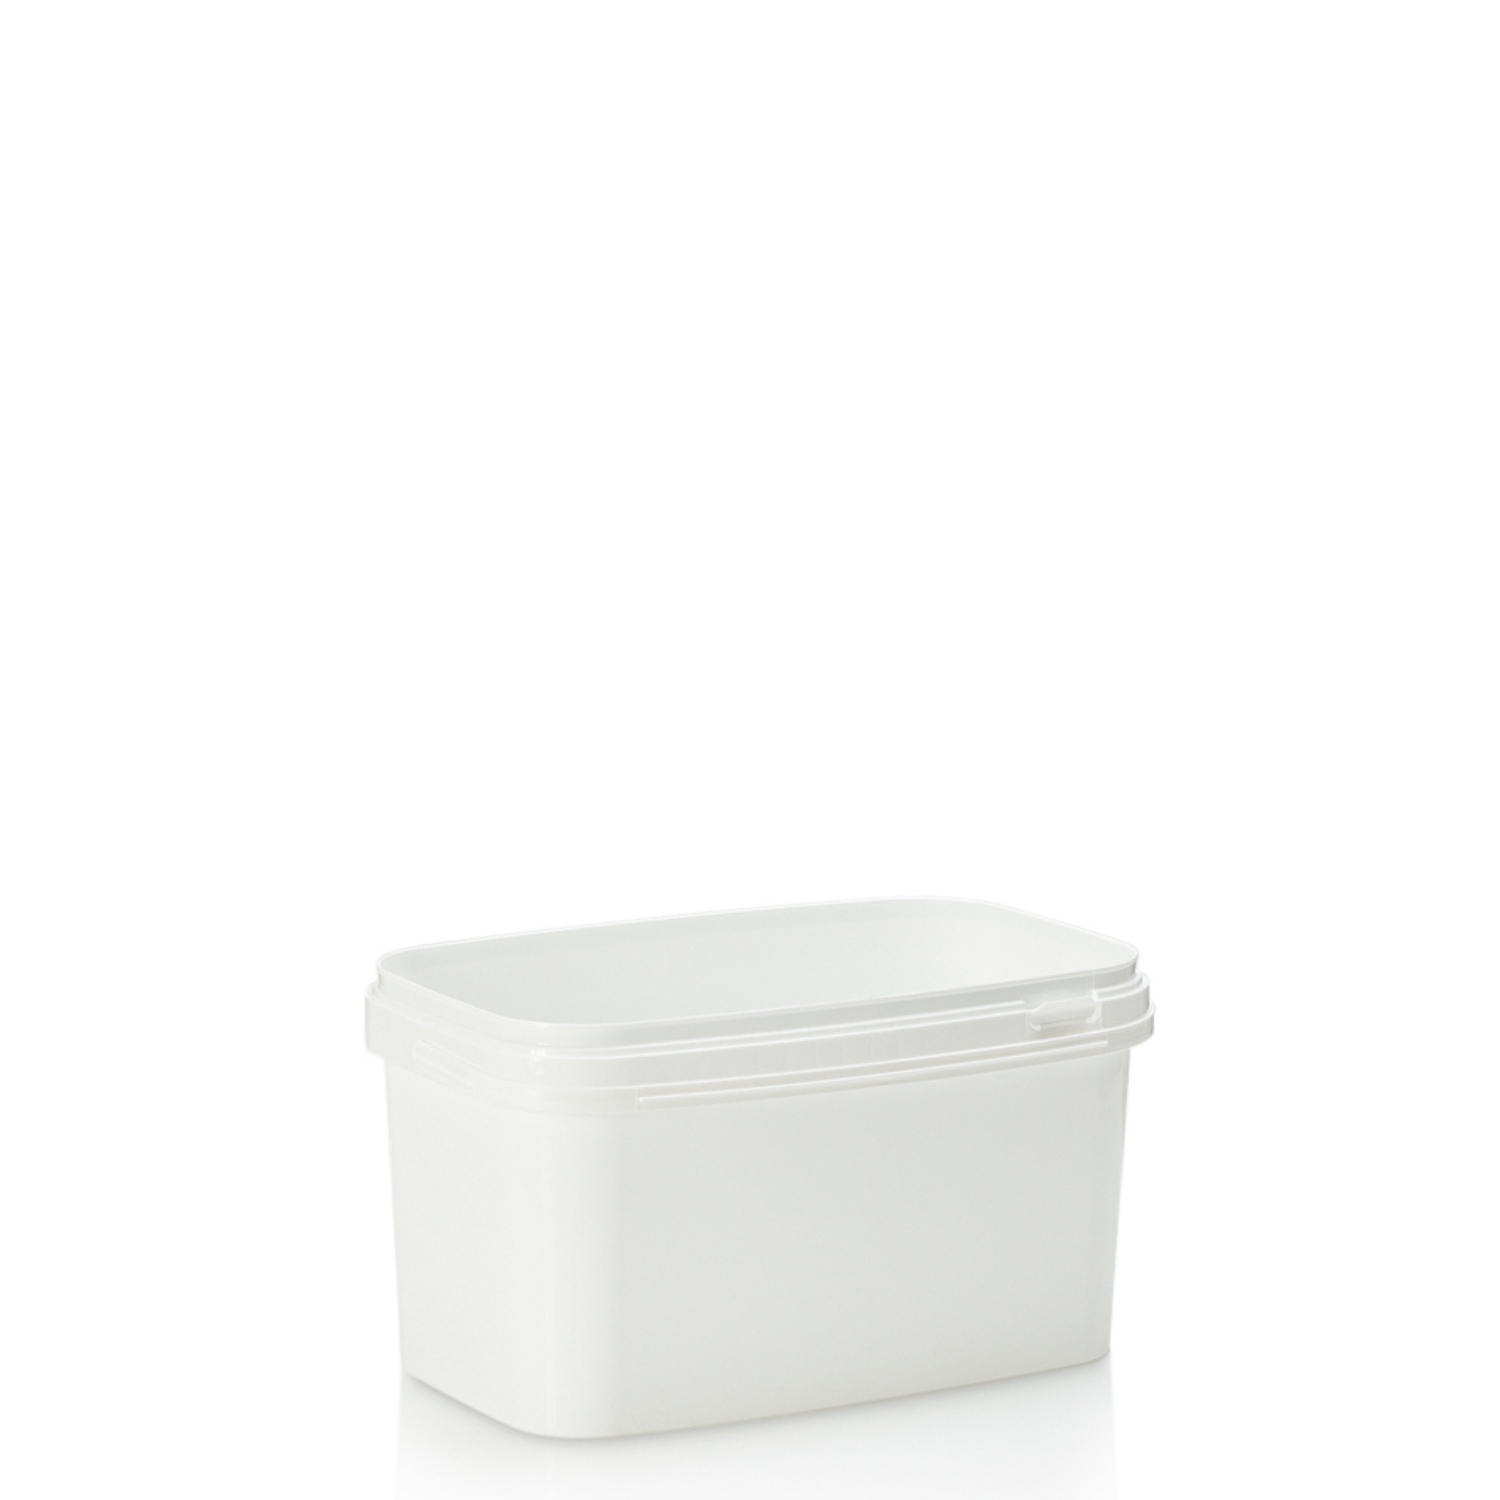 10ltr White PP Rectangular Tamper Evident Pail with Plastic Handle